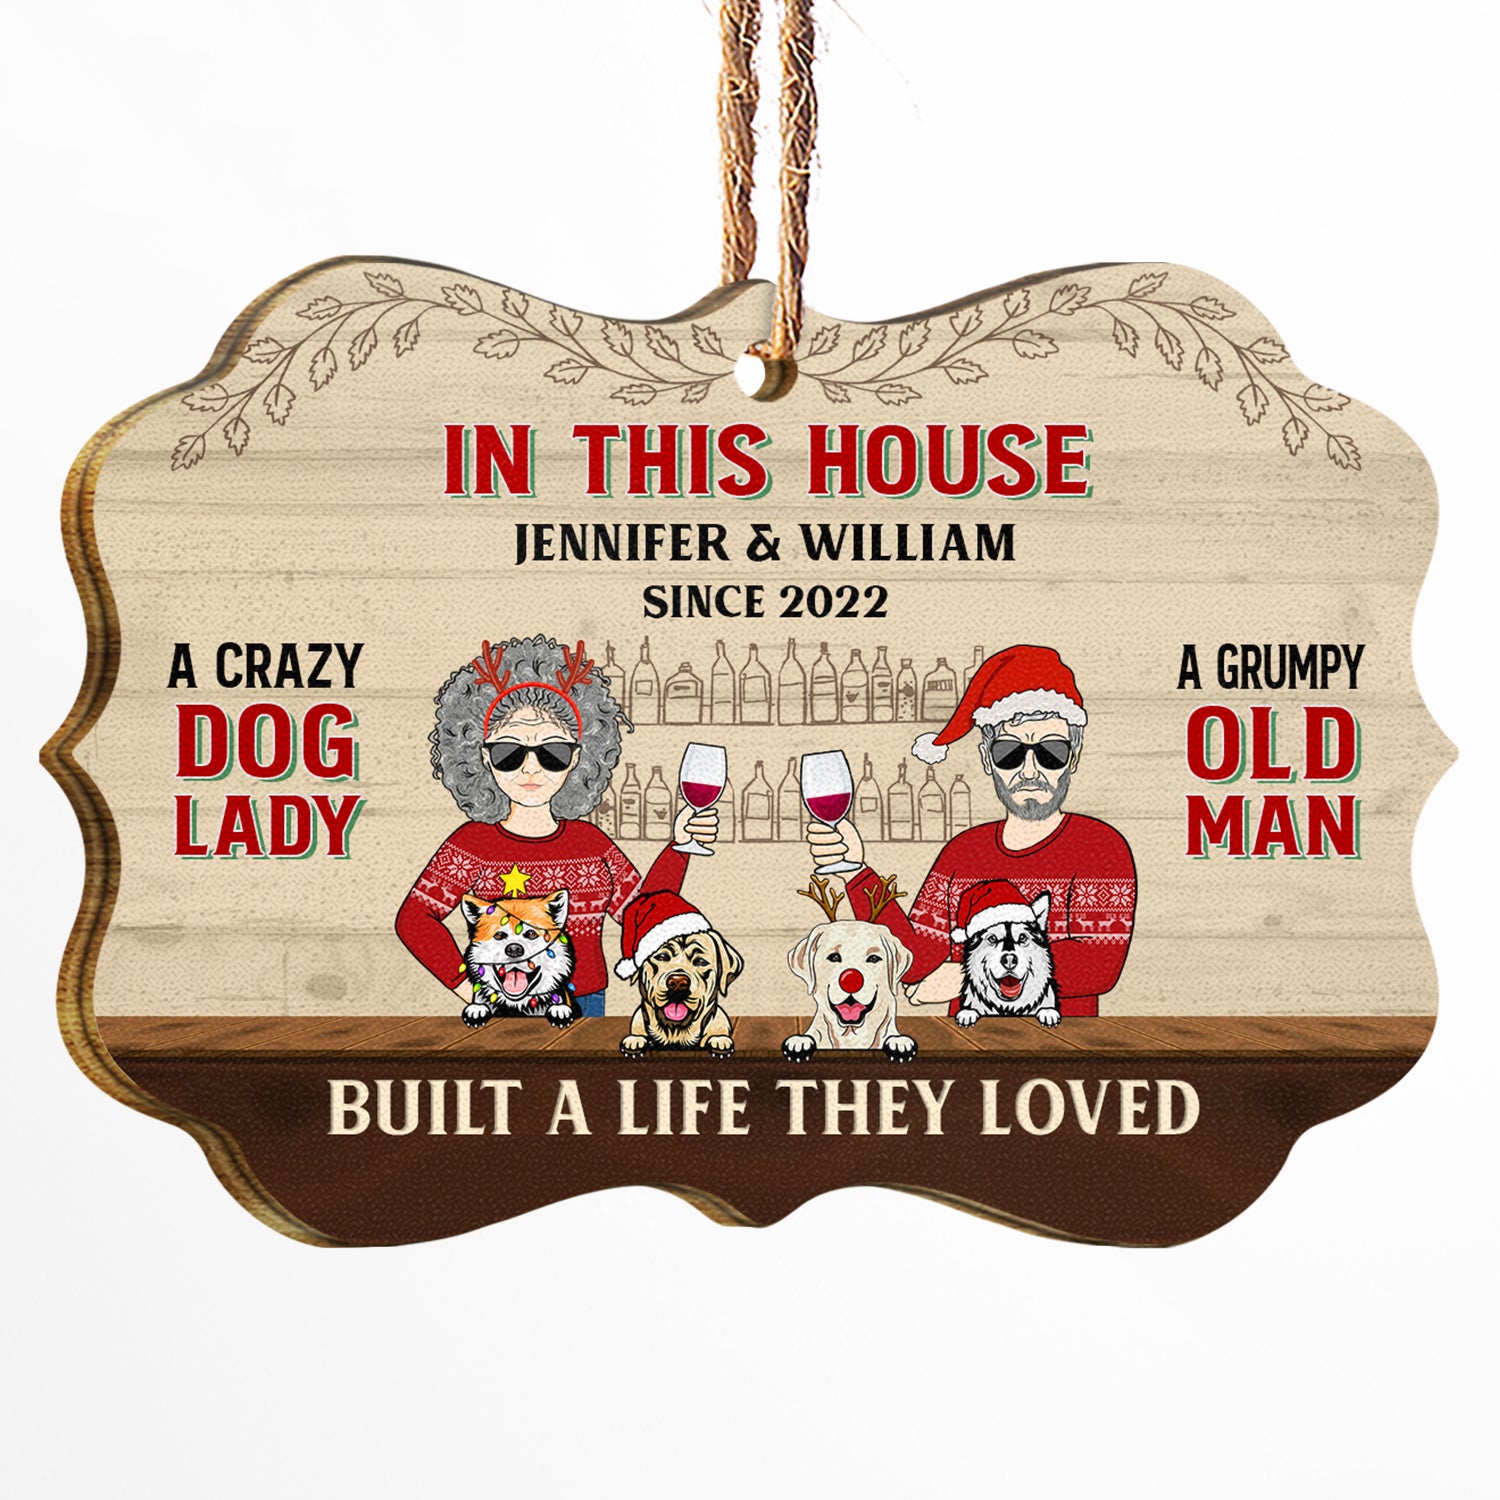 Couple Crazy Dog Lady And Grumpy Old Man - Christmas Gift For Dog & Cat Lovers - Personalized Wooden Ornament